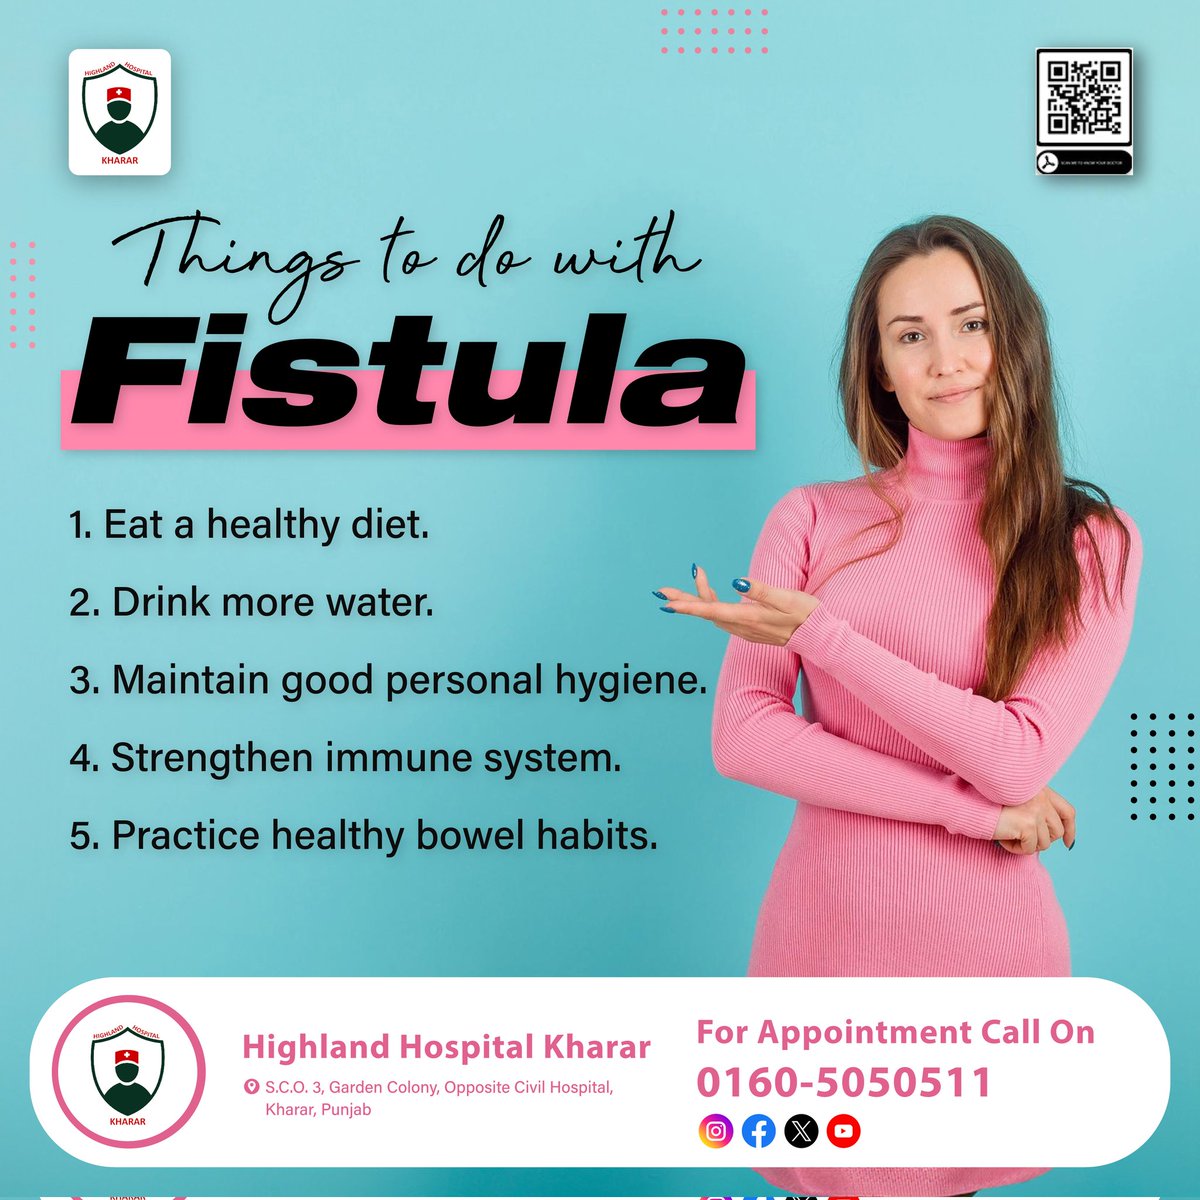 🔬Fistula can be a challenge, but at Highland Hospital Kharar, we're here to guide you every step of the way. L
#HighlandHospitalKharar #FistulaCare #HealthcareHeroes #PatientFirst #HealthJourney #FistulaAwareness #HealthcareTips #MedicalGuidance #HealthcareIndia #Drjatindersingh